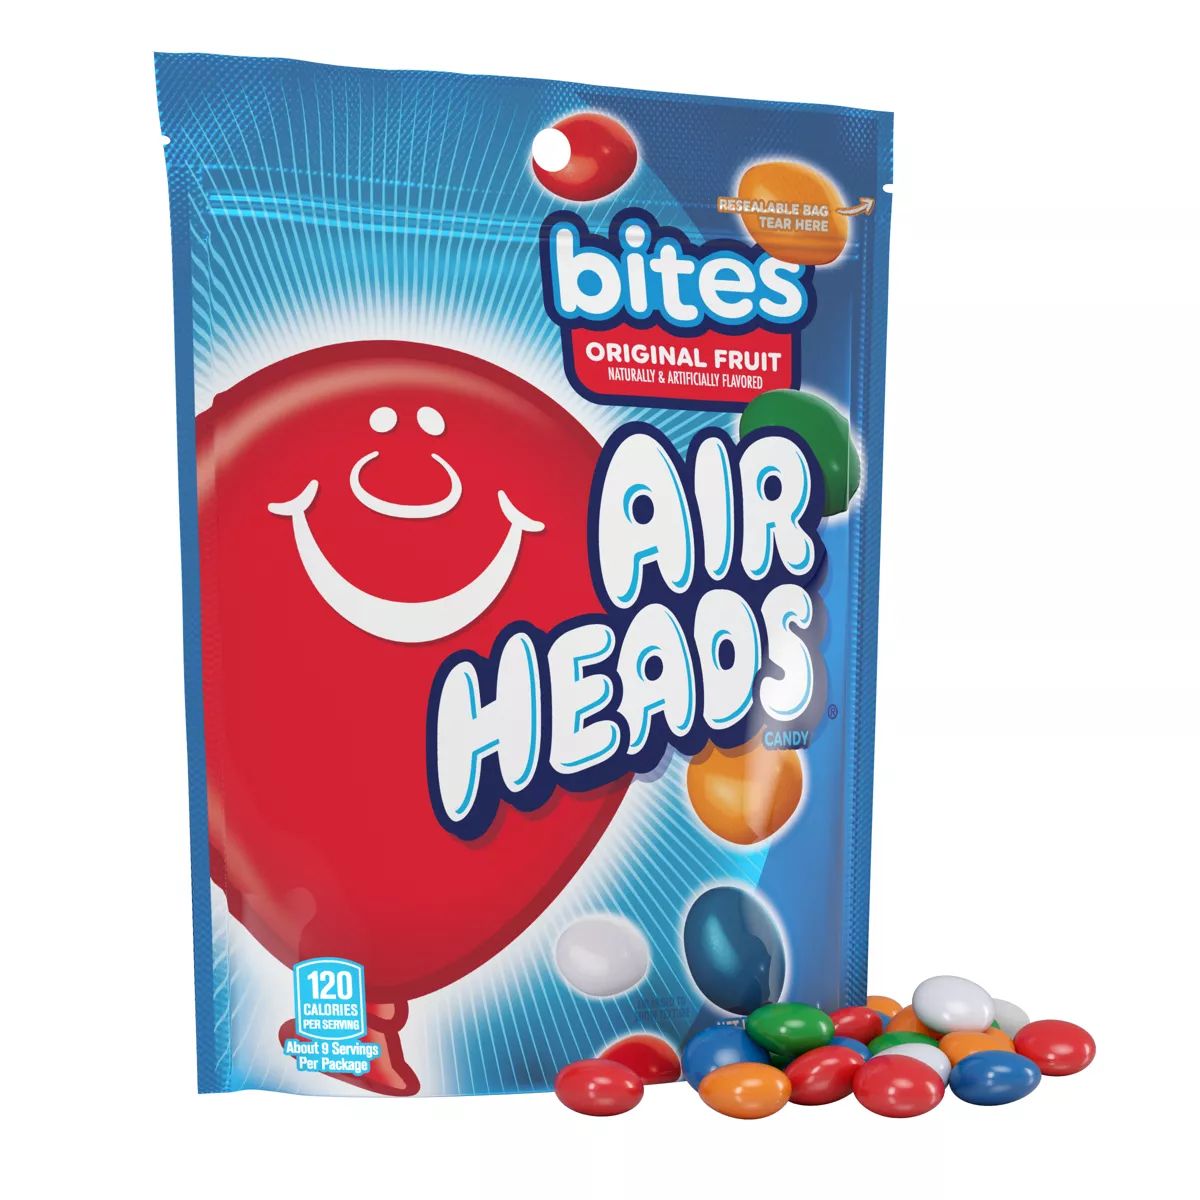 Airheads Bites Fruit Flavored Candy Standup Bag - 9oz | Target